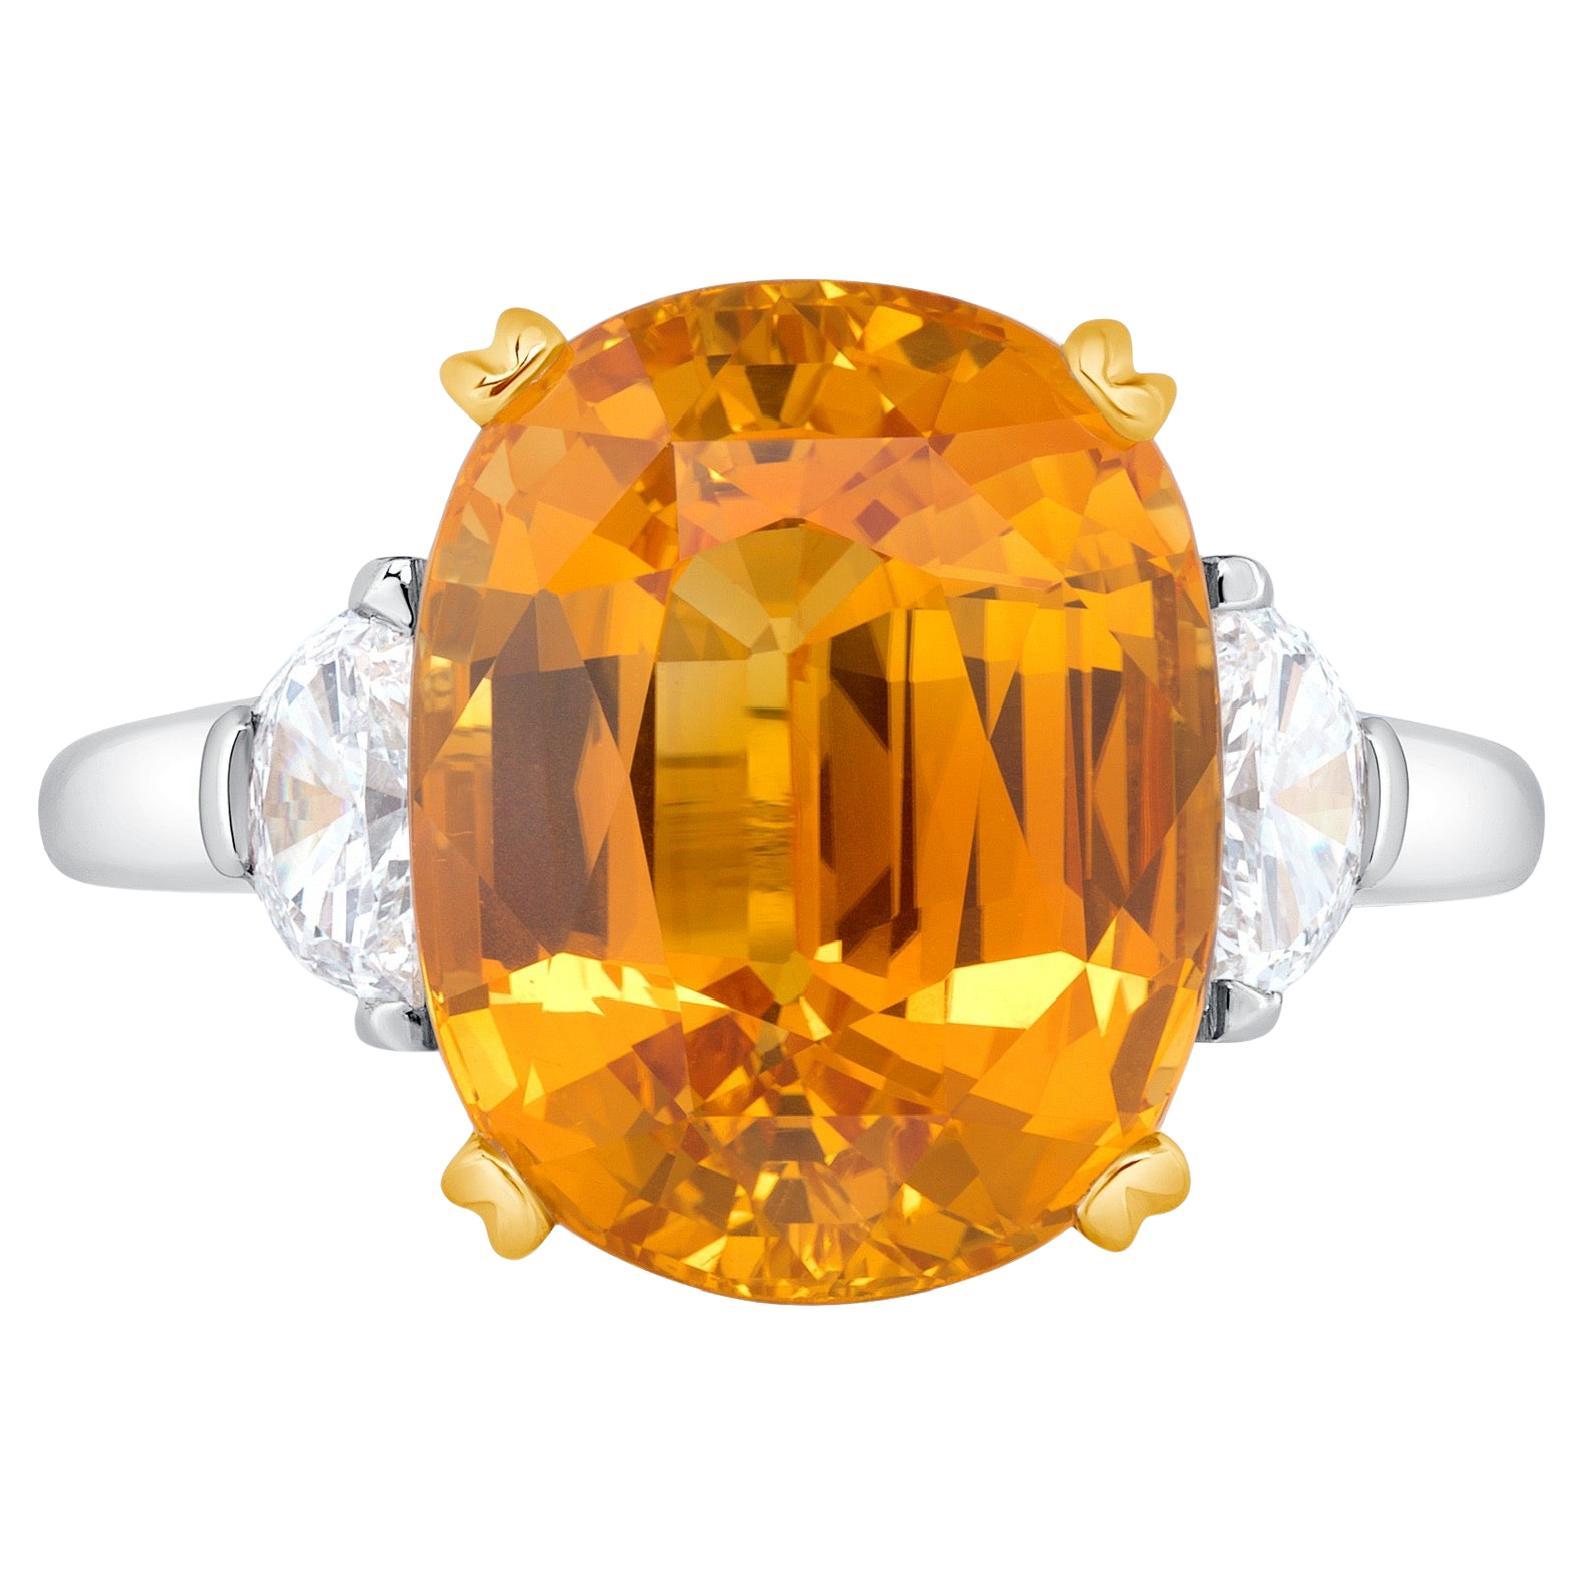 10.78ct Yellow Sapphire ring. GIA certified.